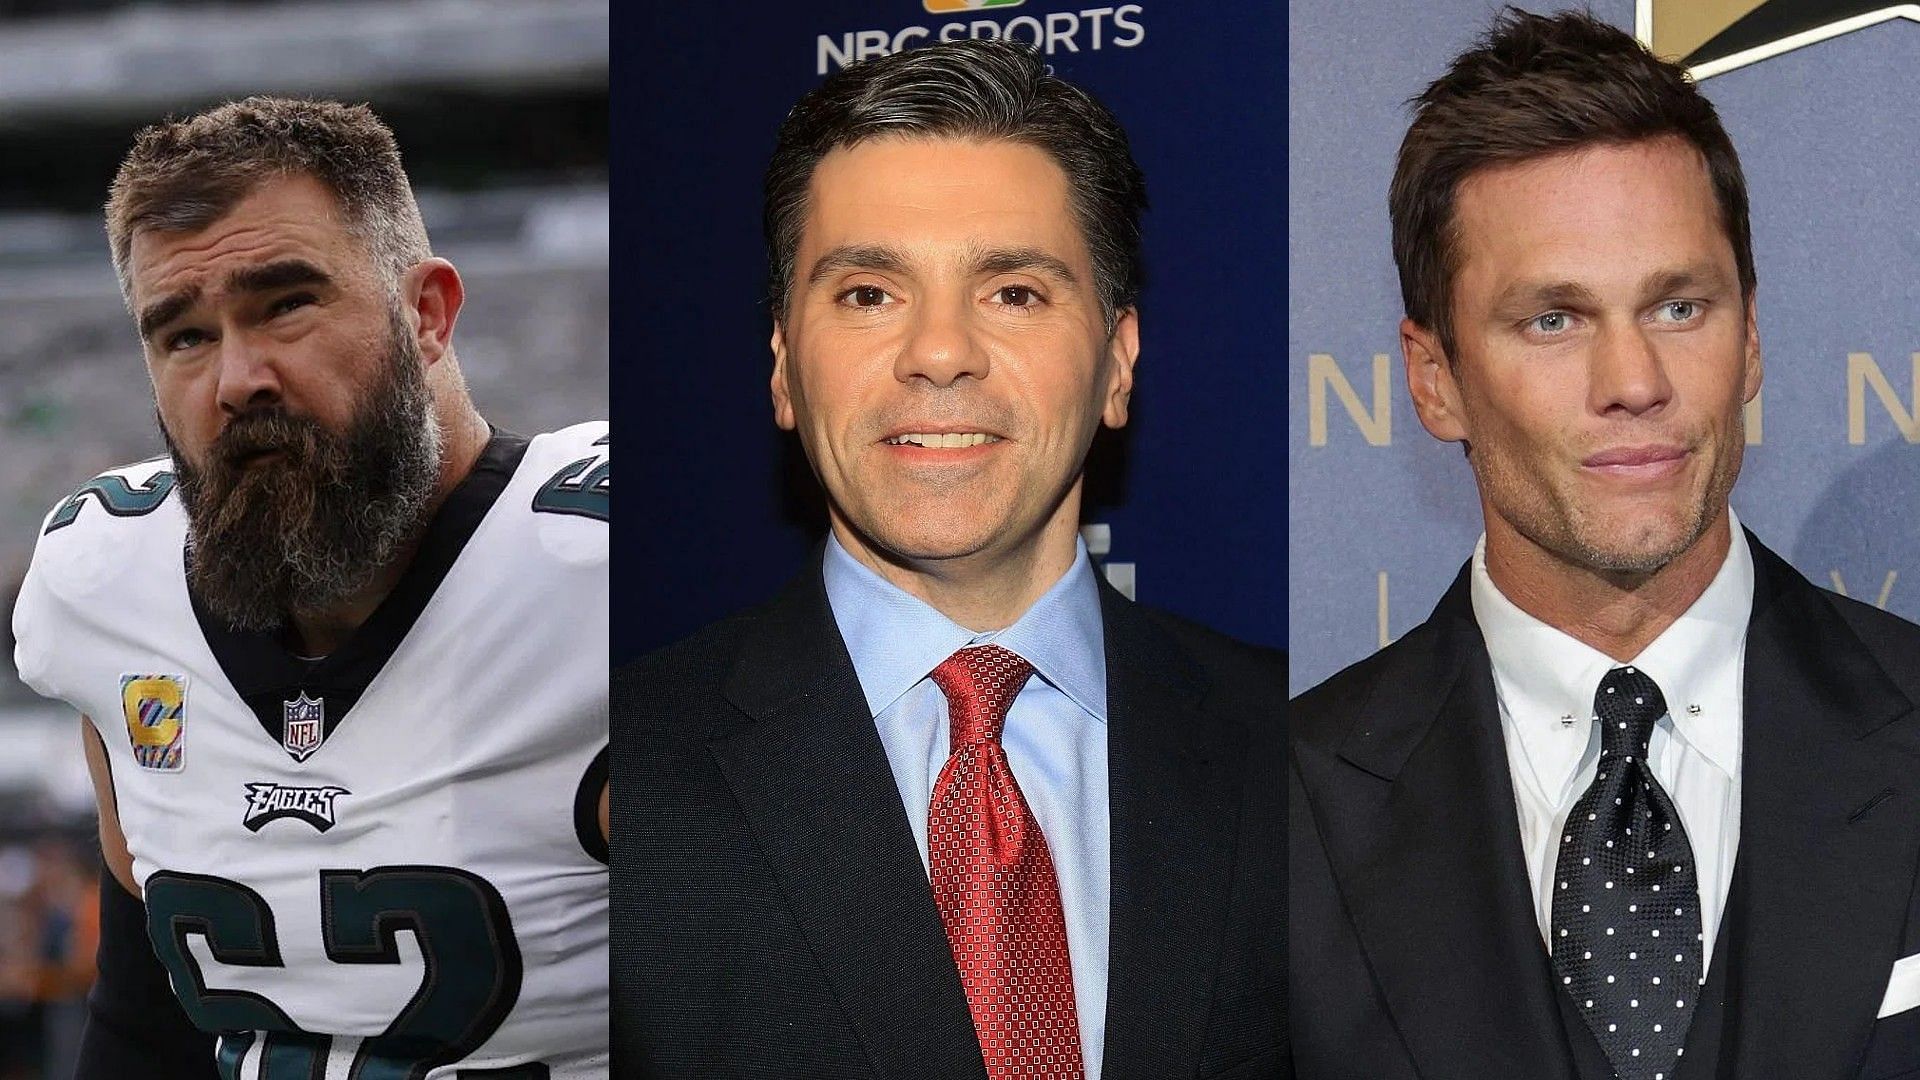 Mike Florio floats possibility of Jason Kelce morphing into the next John Madden in rumored Tom Brady-like career move